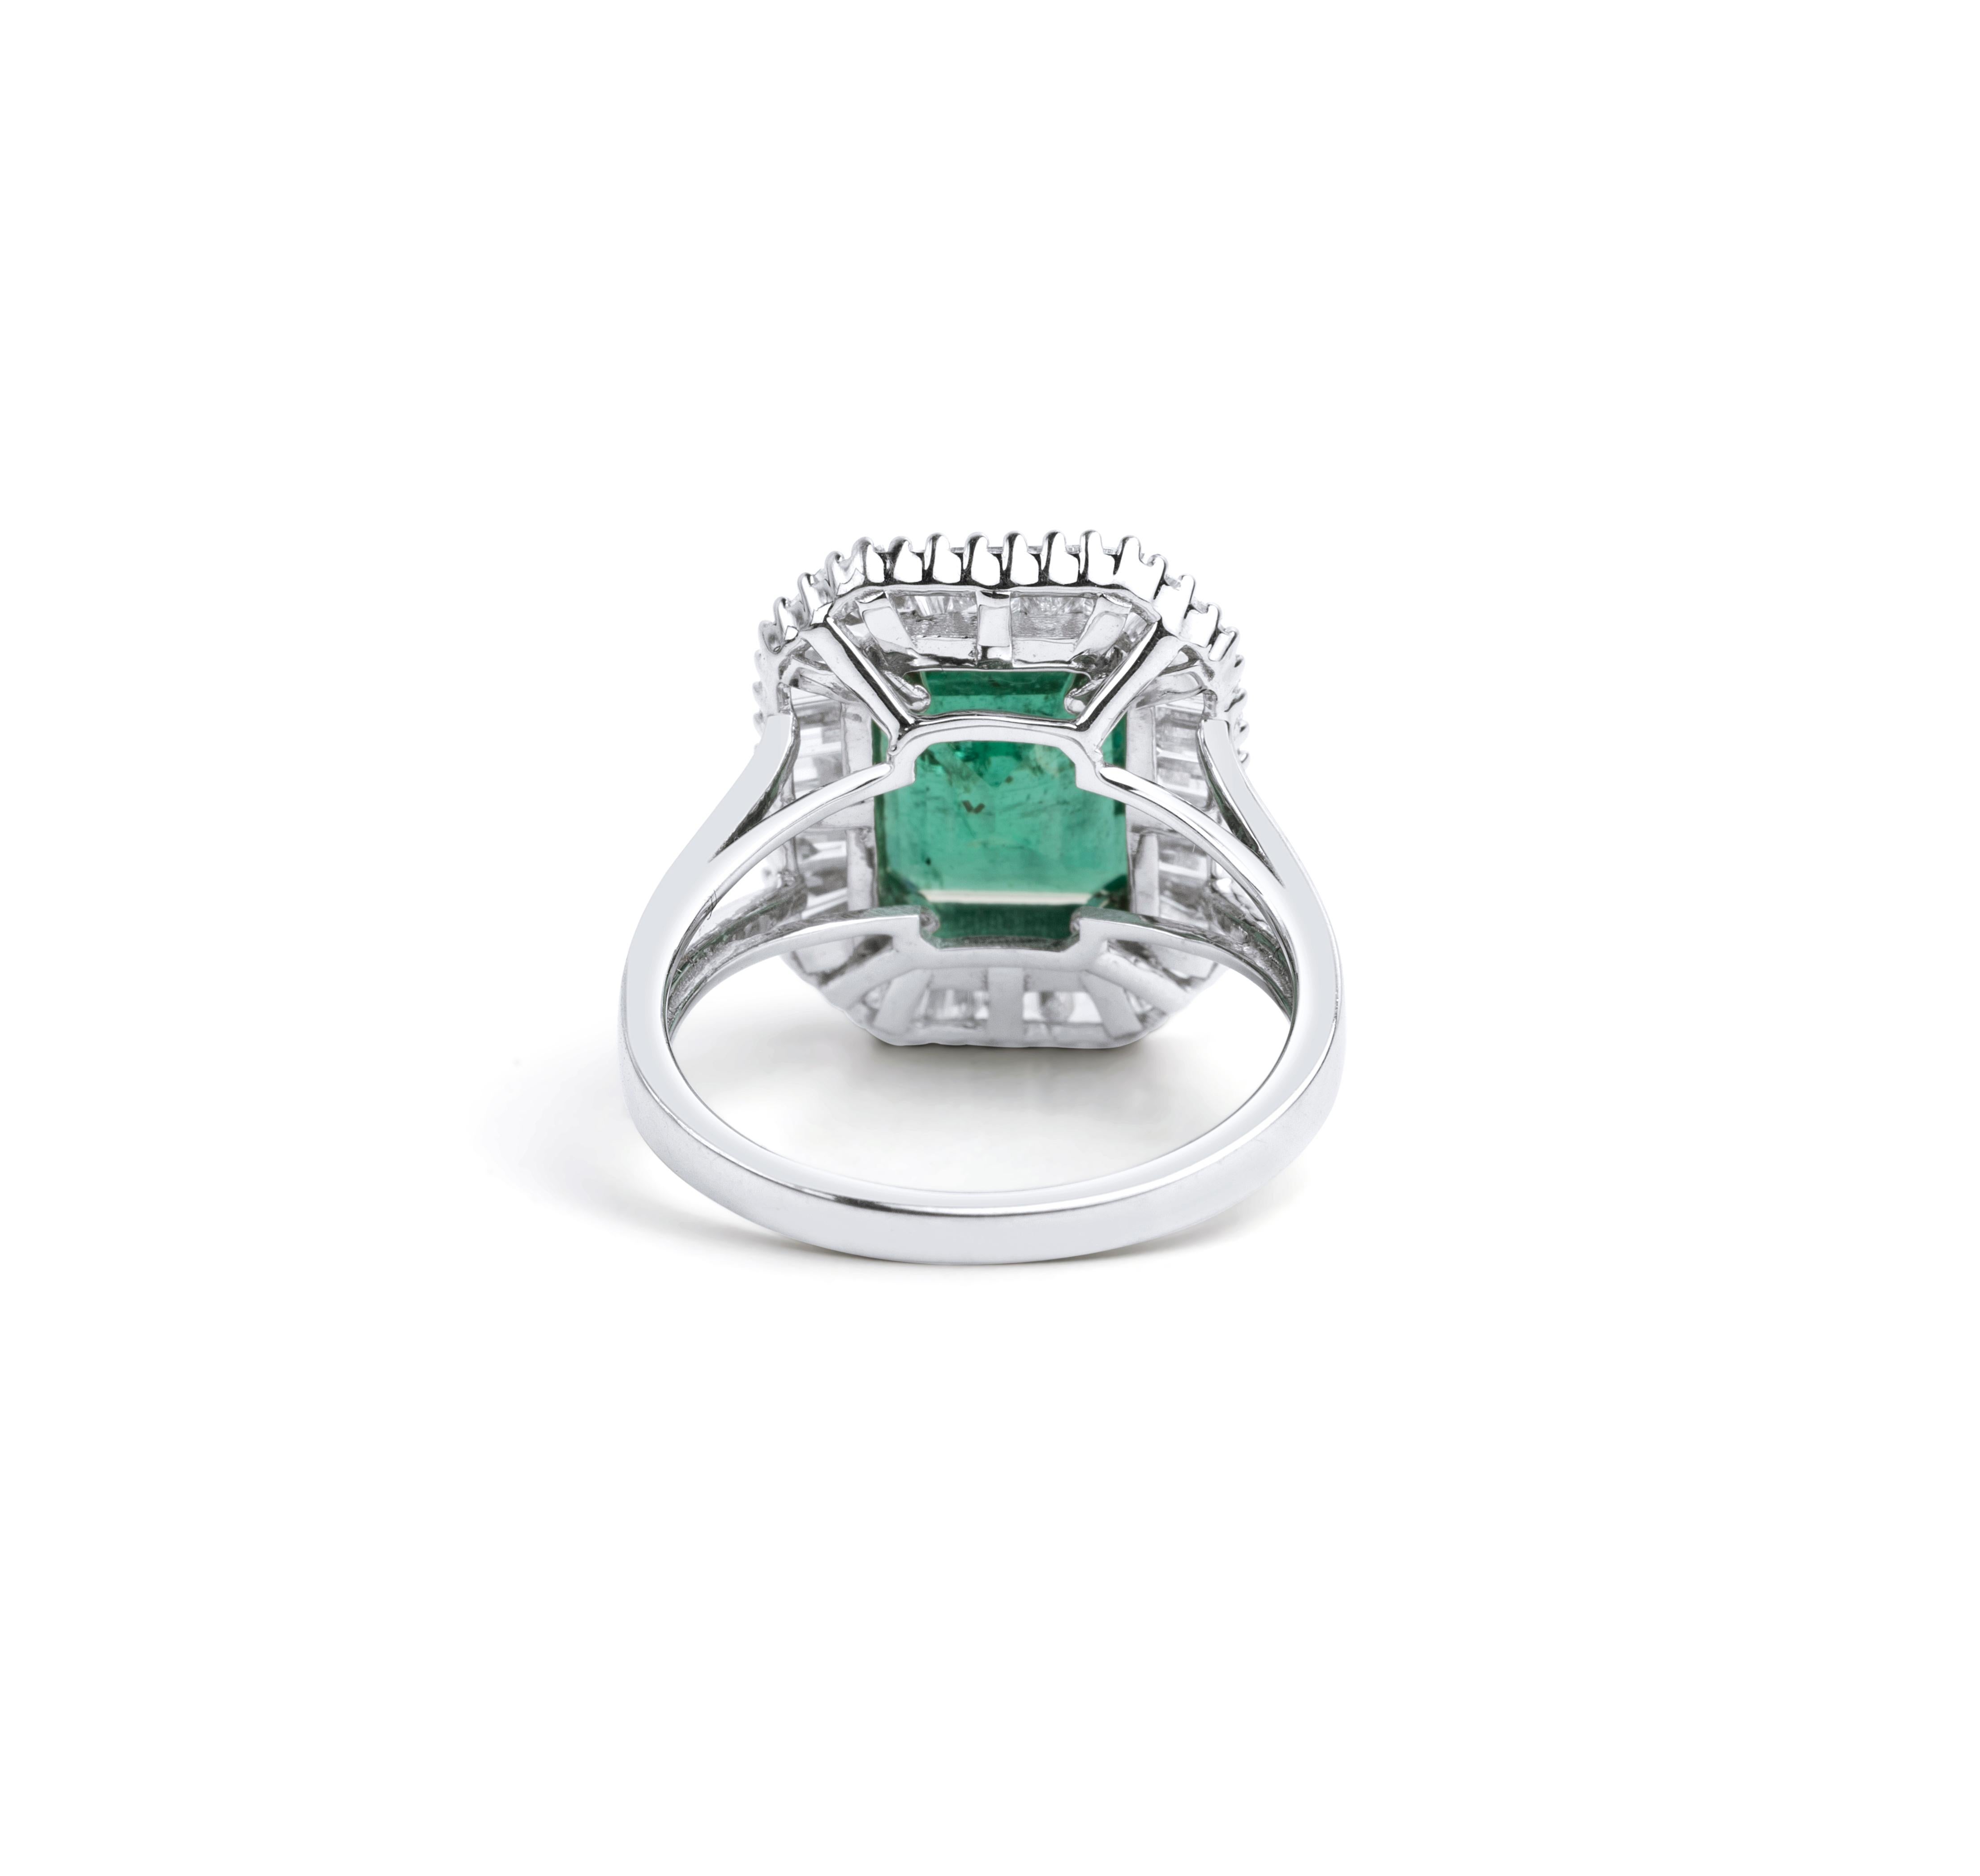 4 Carat Natural Emerald Diamond Cocktail Engagement Ring 18k White Gold

Available in 18k white gold.

Same design can be made also with other custom gemstones per request.

Product details:

- Solid gold

- Diamond - approx. 1.4 carat

- Emerald -